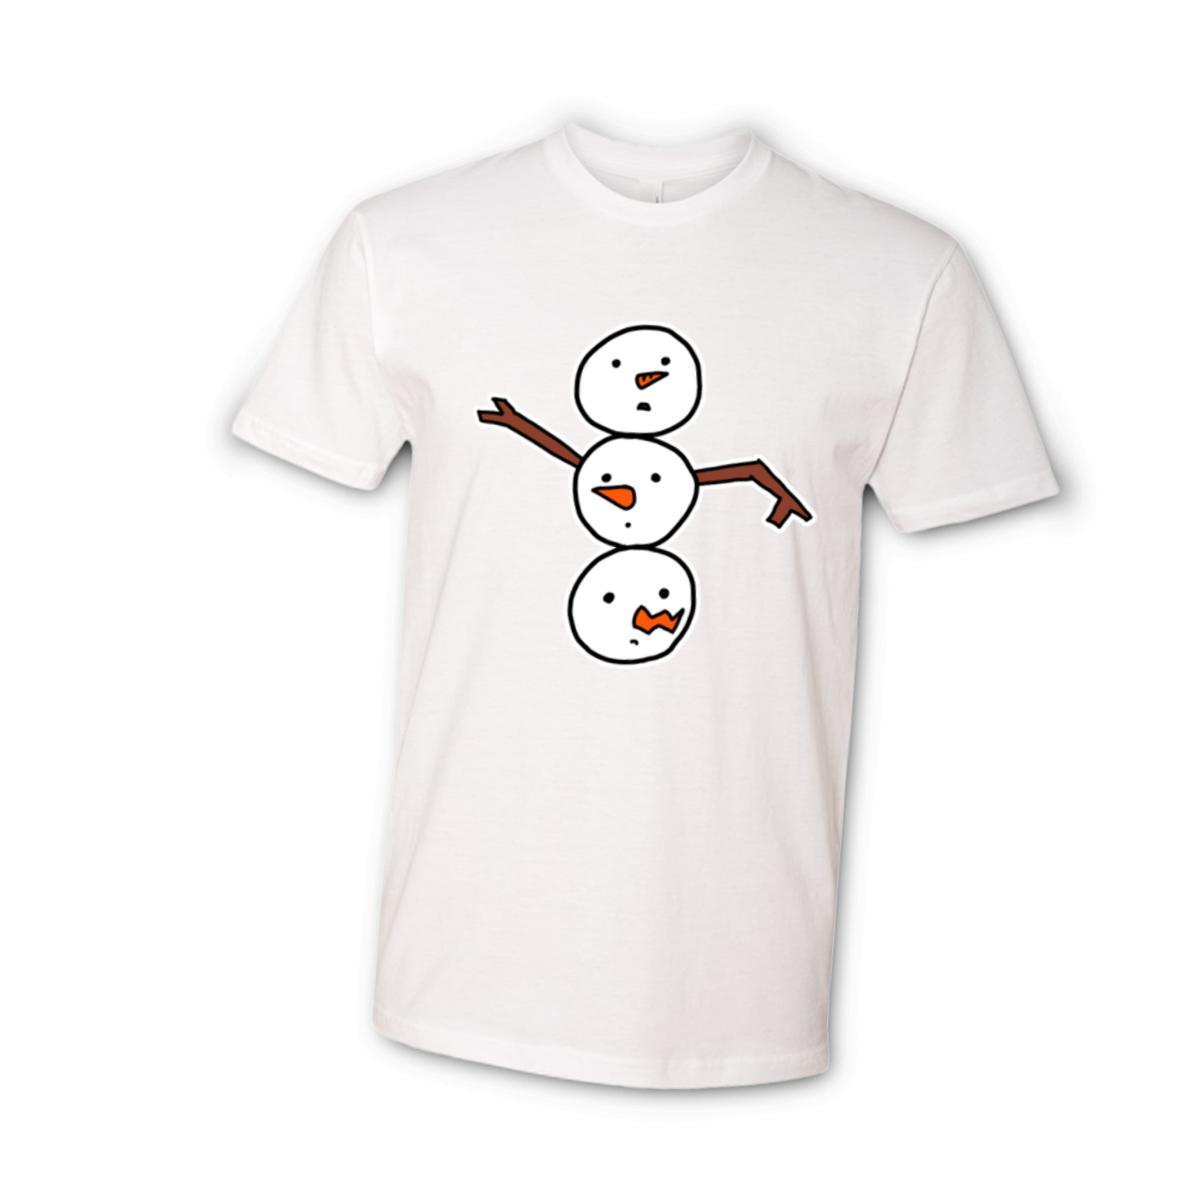 Snowman All Heads Unisex Tee Double Extra Large white